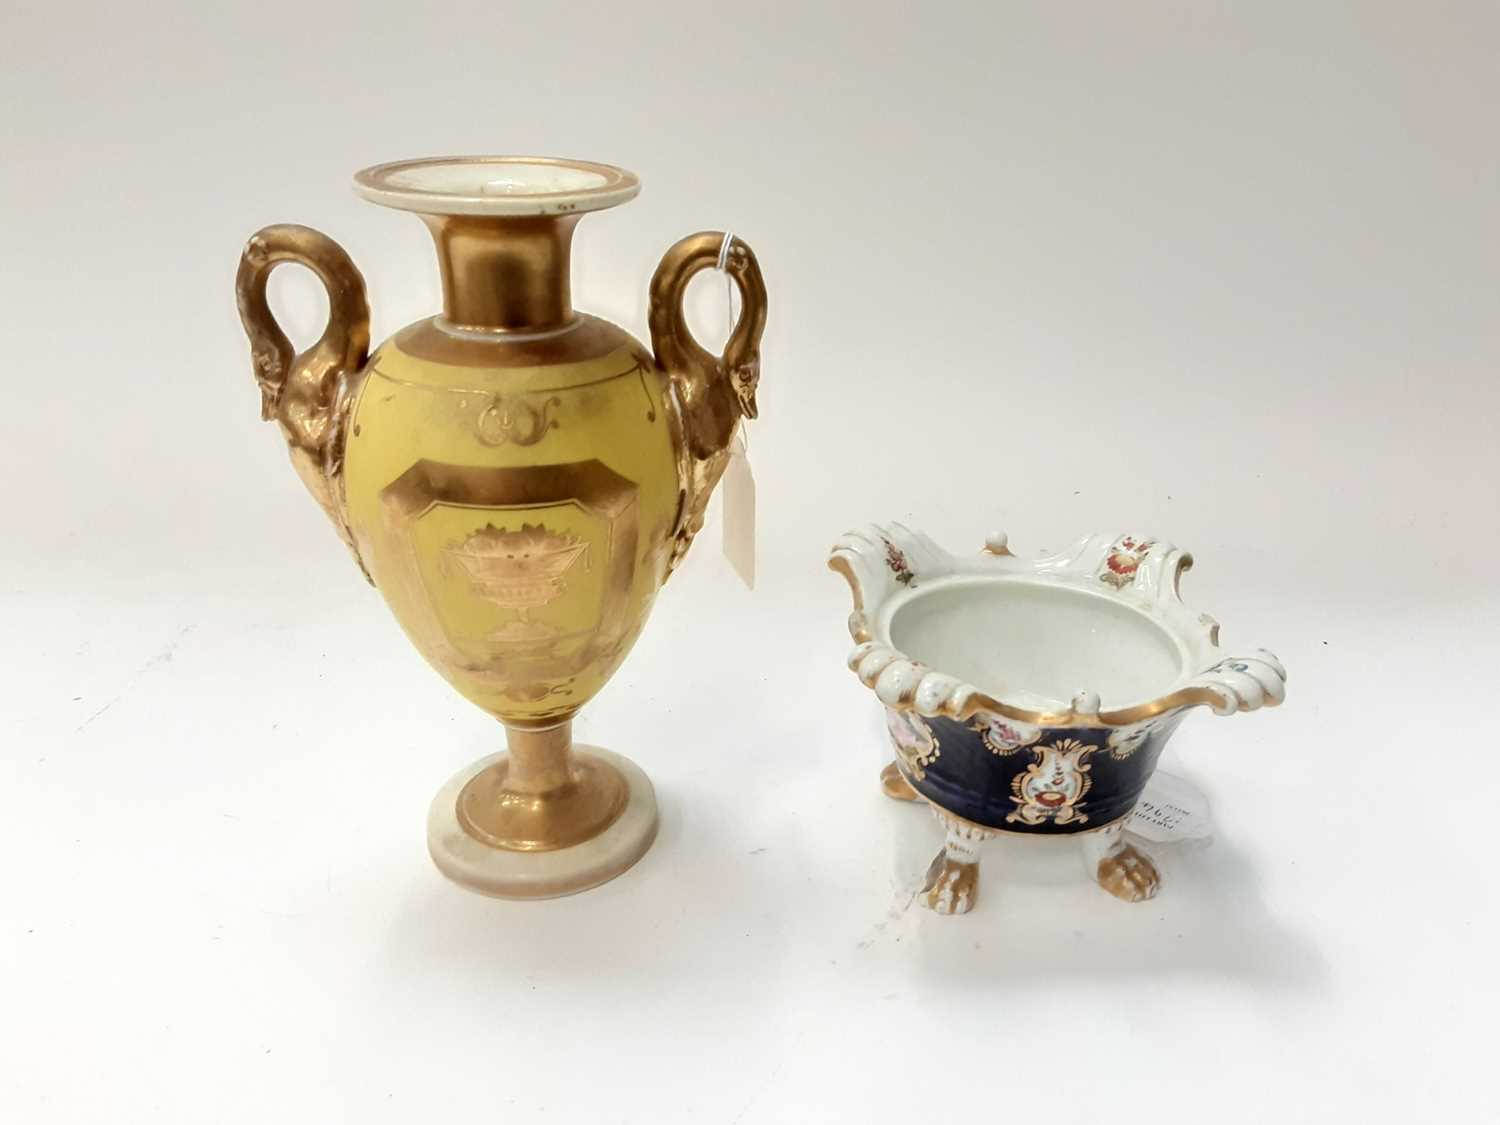 Lot 1294 - 19th century English porcelain vase on matt yellow ground with gilt decoration together with a dish on four hoof feet, possibly by Derby (2)